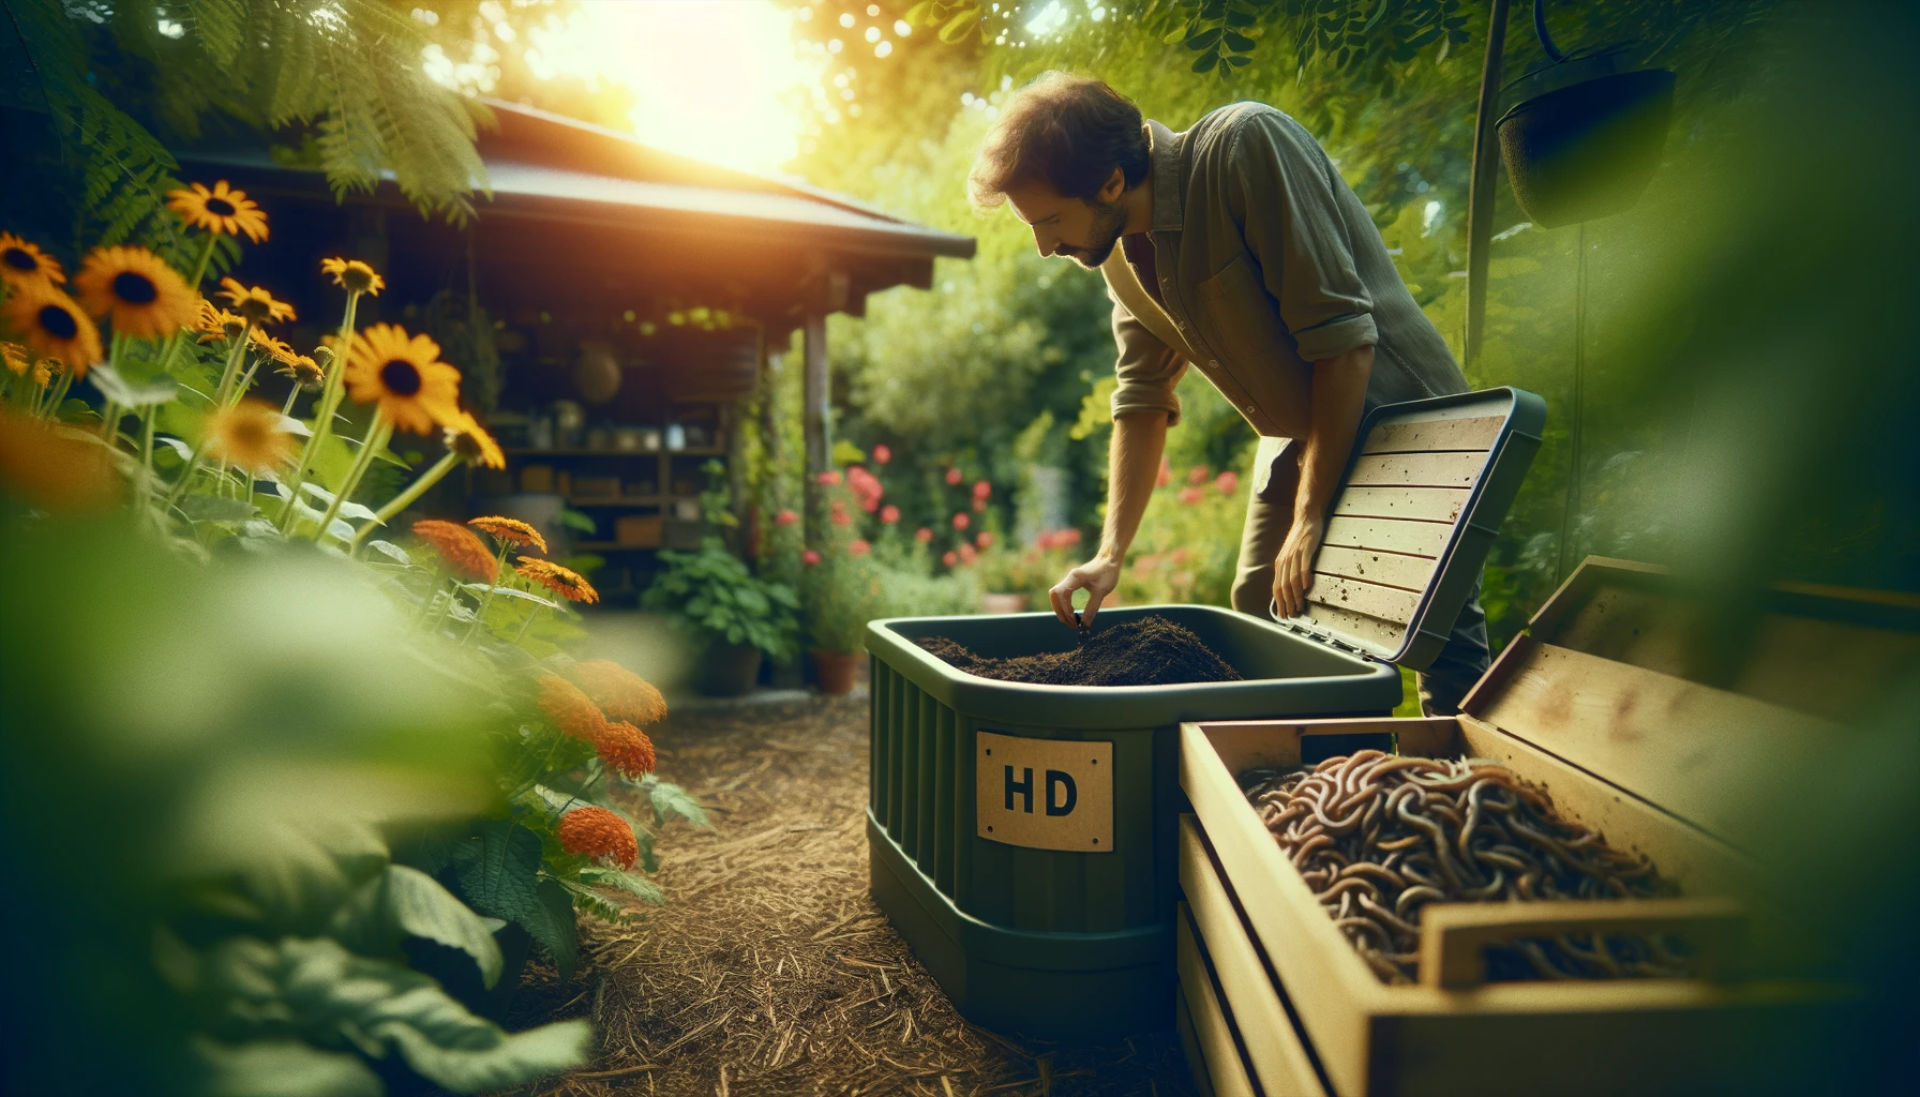 Troubleshooting and Maintenance: The final image illustrates a person troubleshooting a vermicomposting bin in a garden setting, focusing on the maintenance aspect and the hands-on approach required for vermicomposting.